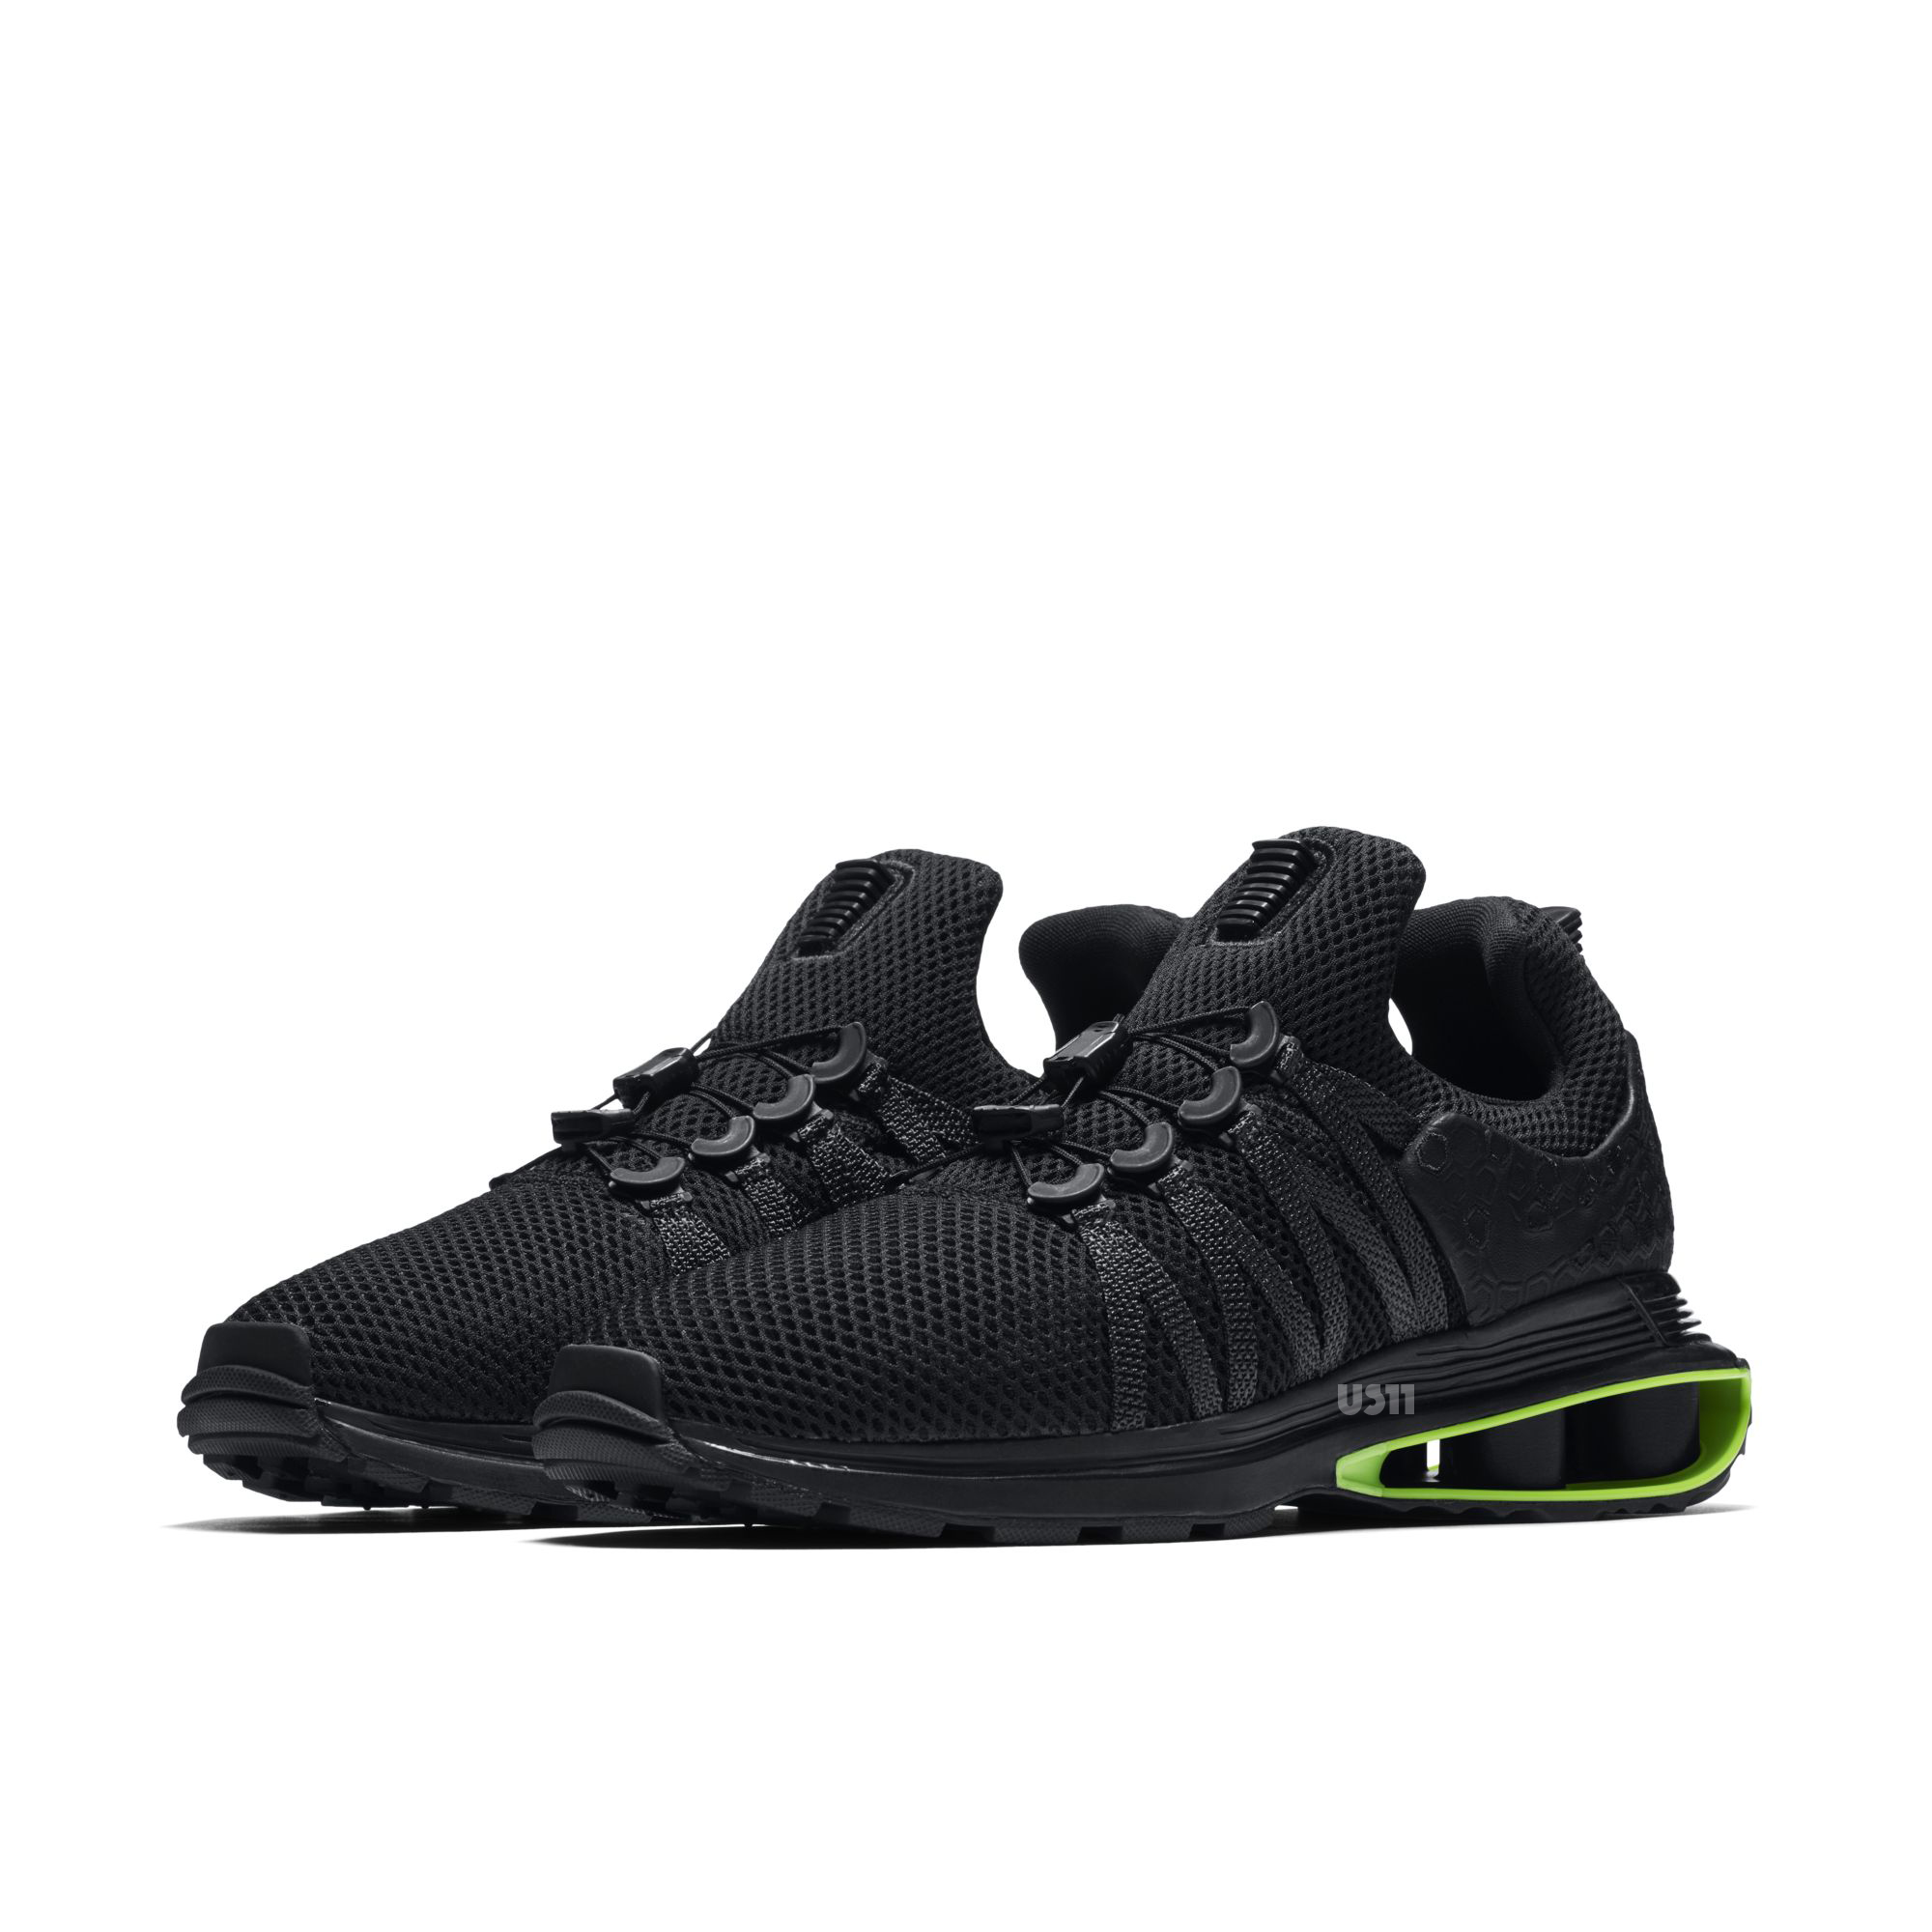 The Nike Shox Gravity Luxe Sports a New 